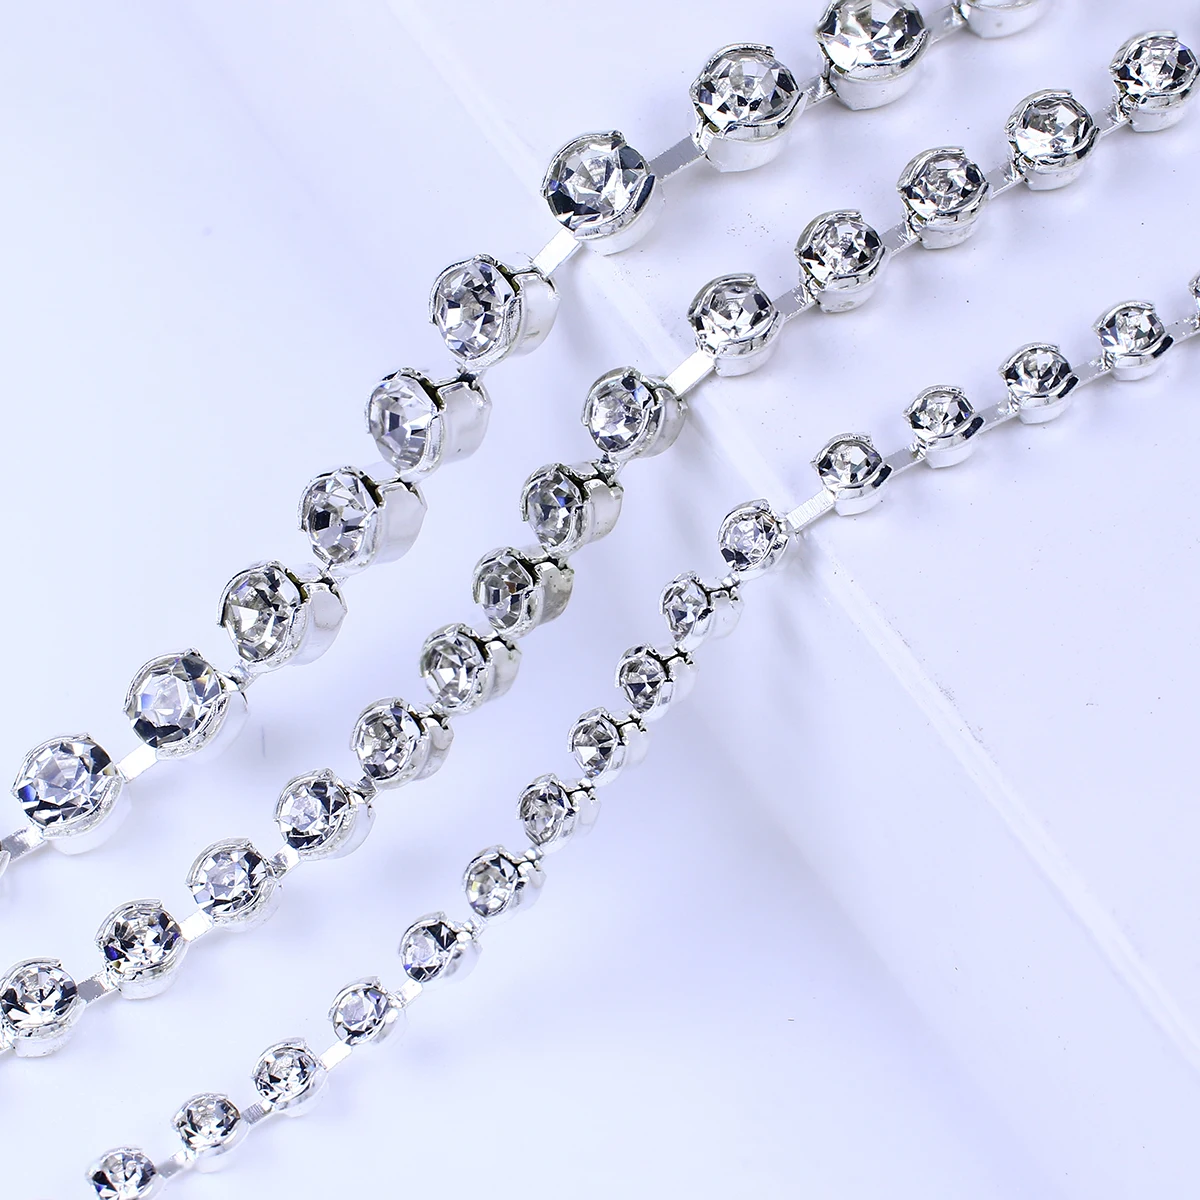 

Dongzhou 2.5 MM Square base Crystal cupchain SS8 Sliver plating Rhinestone Cupchain Trimming strass for Clothes Dresses